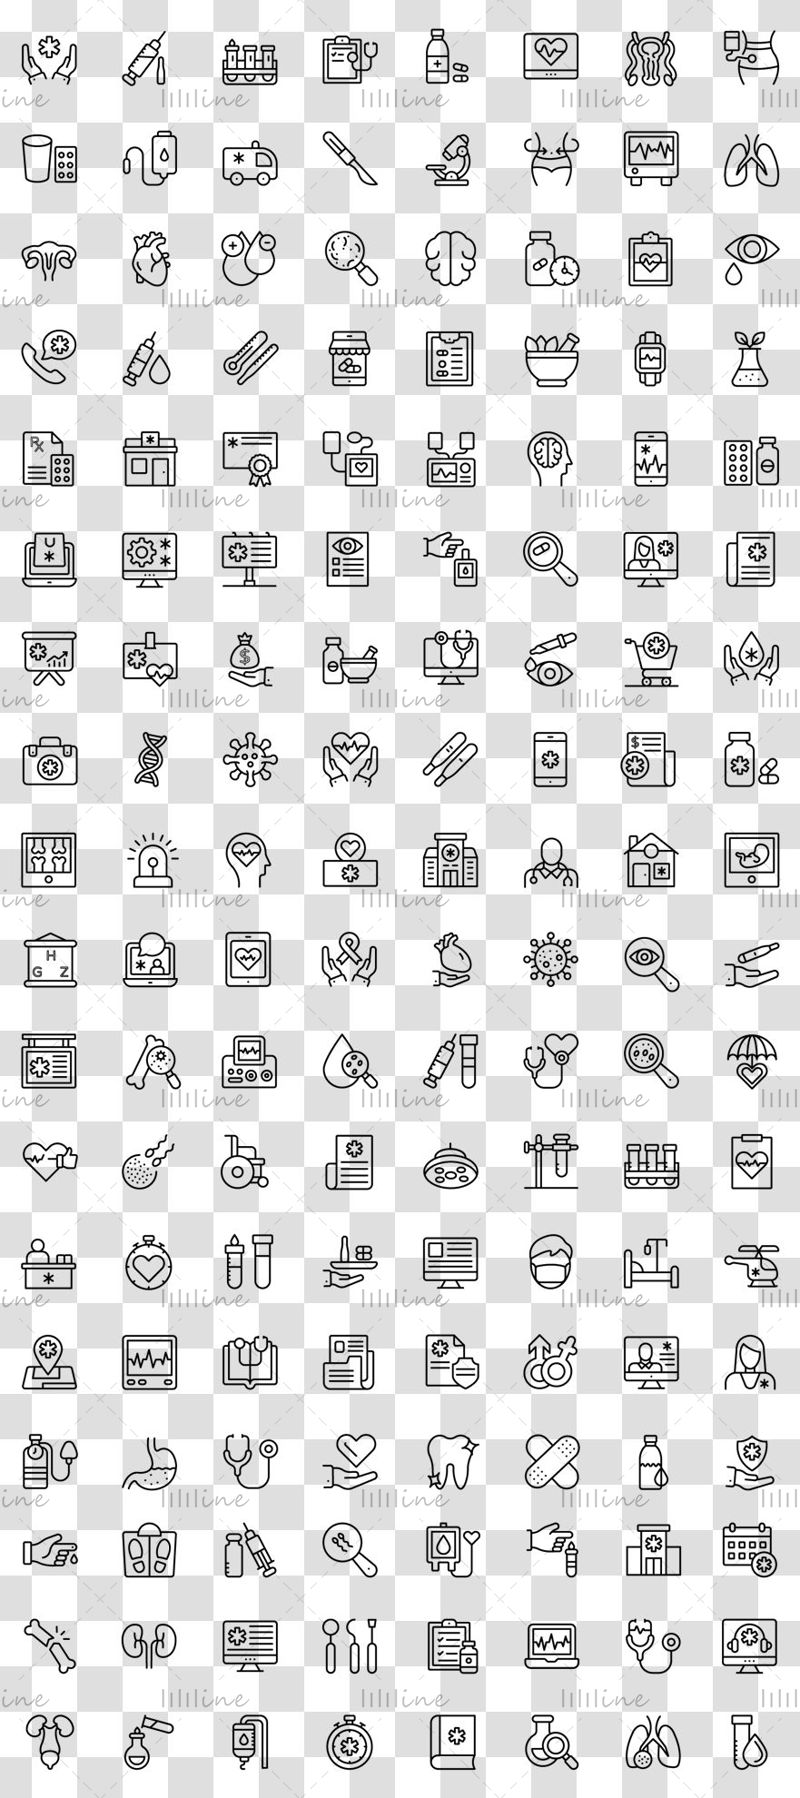 140+ Medical Linear Icons Pack